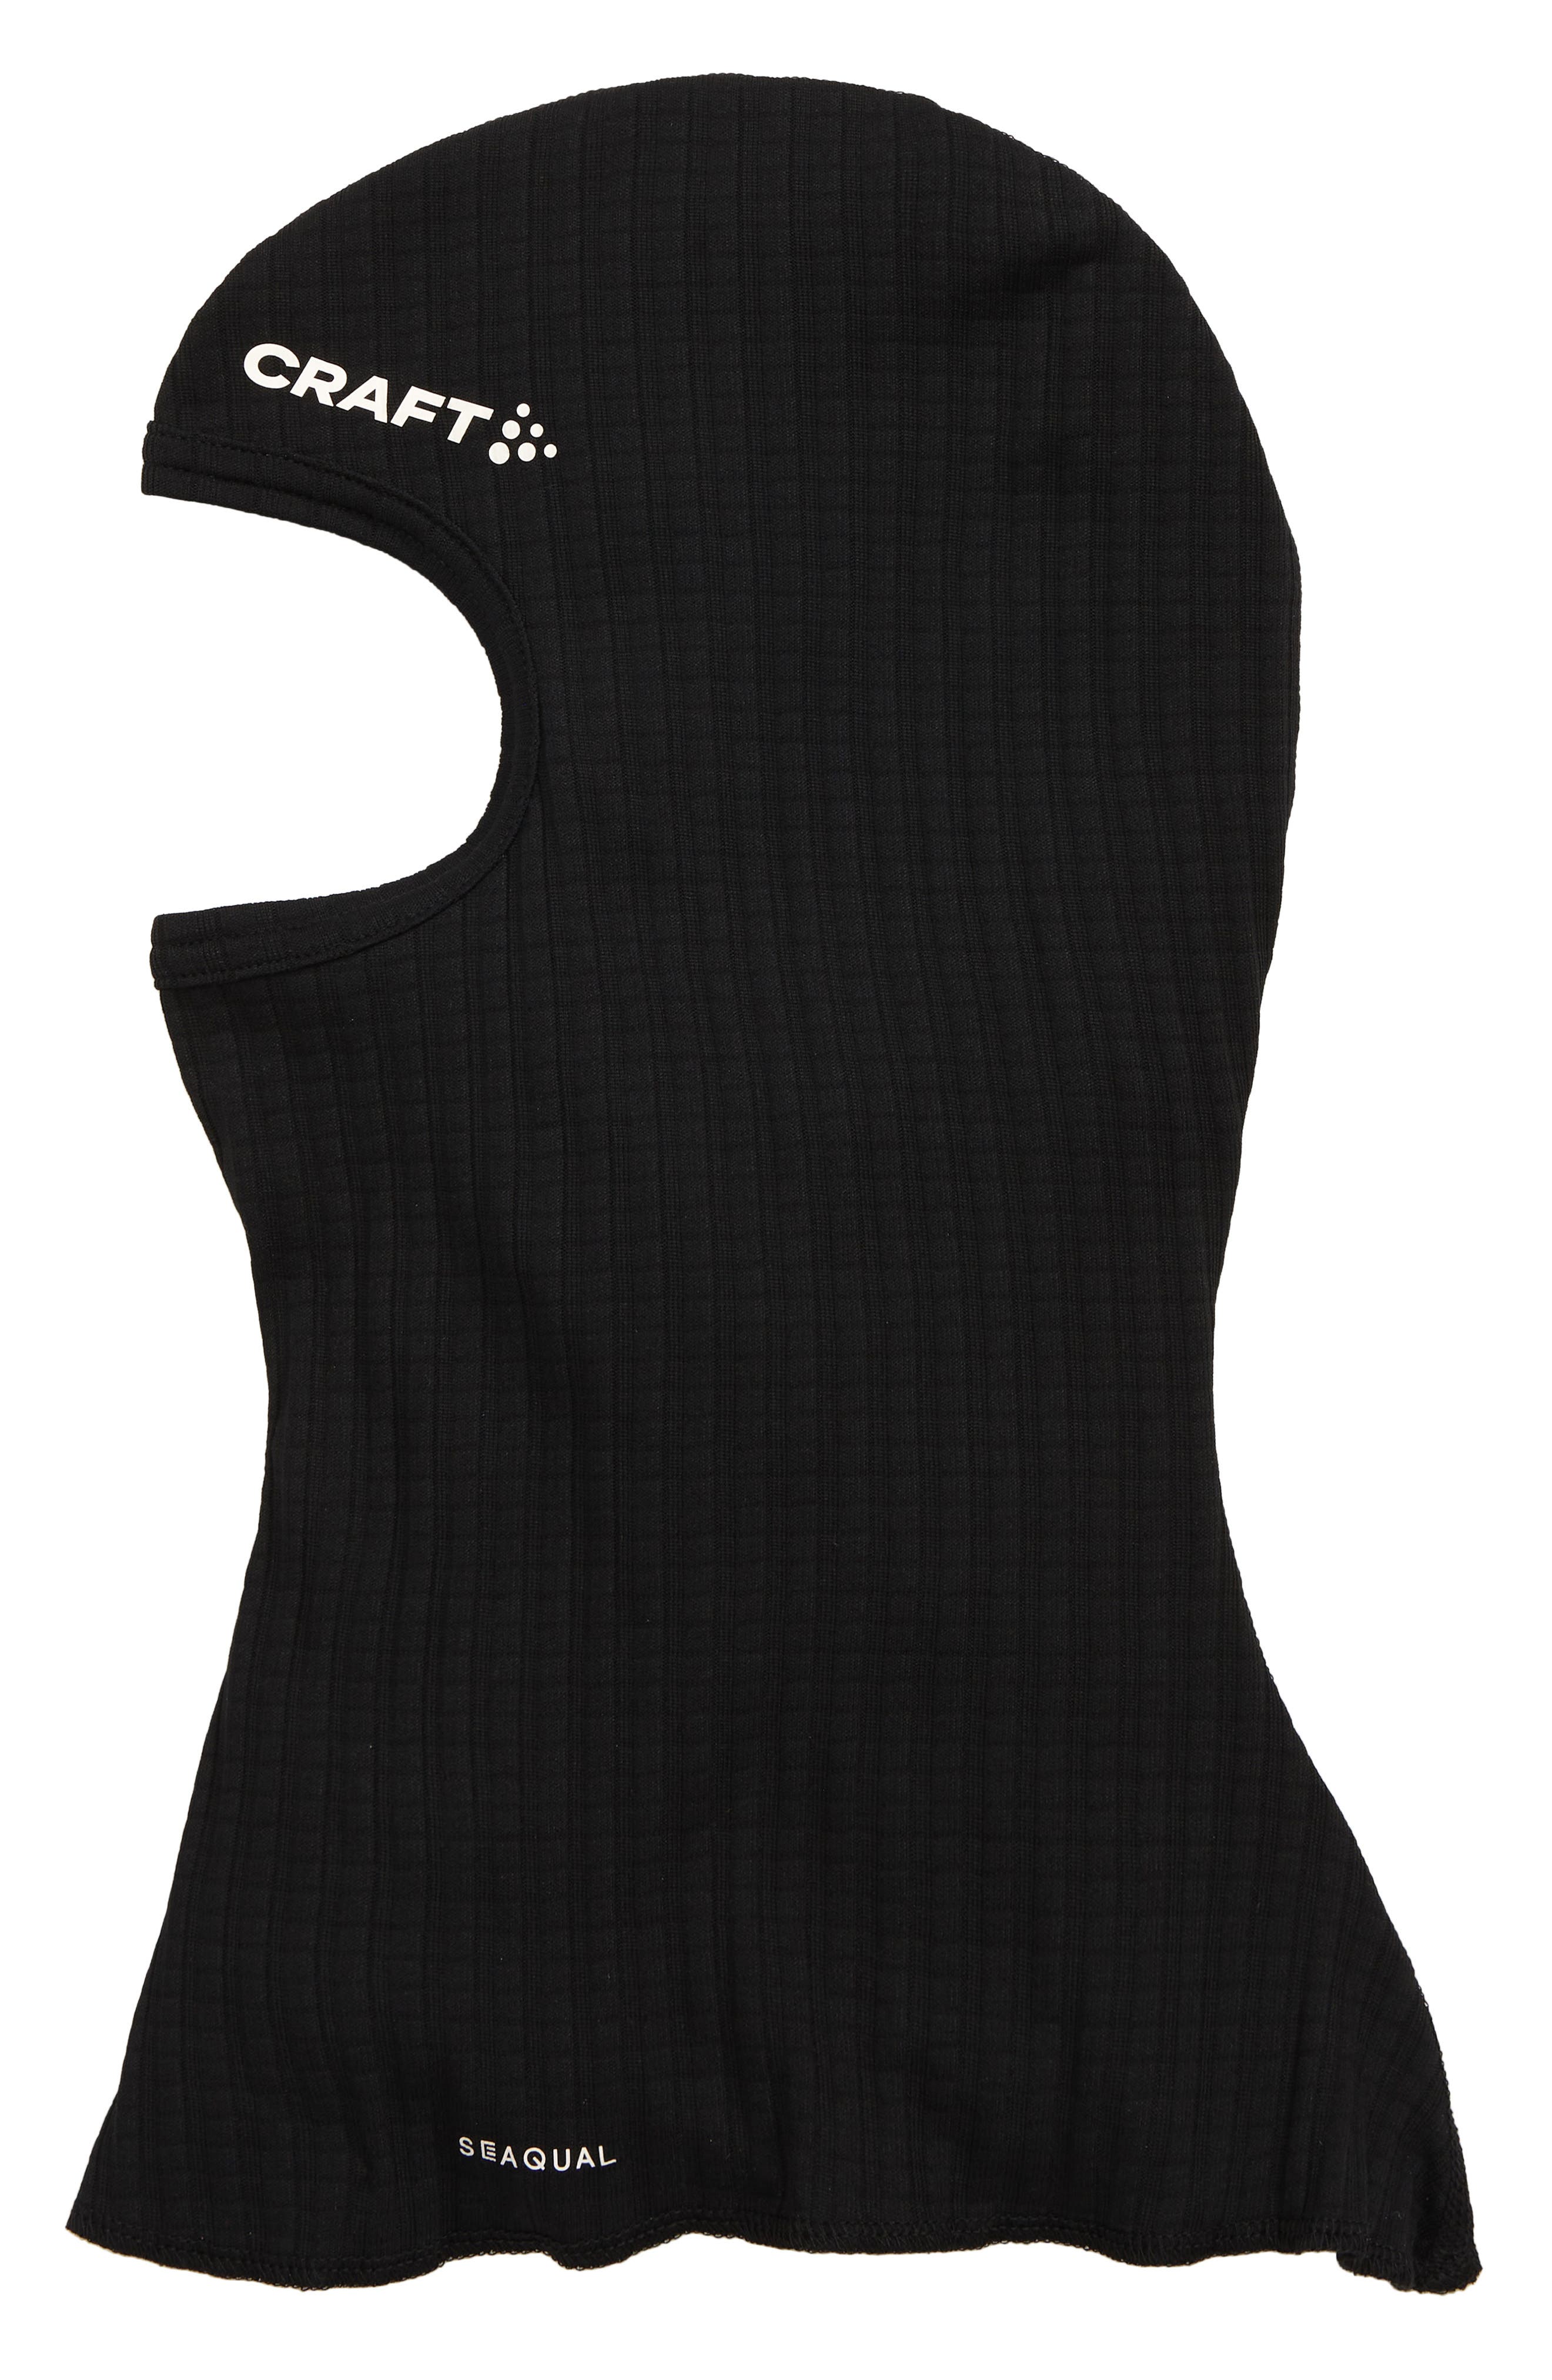 Craft Active Extreme X Balaclava in Black at Nordstrom